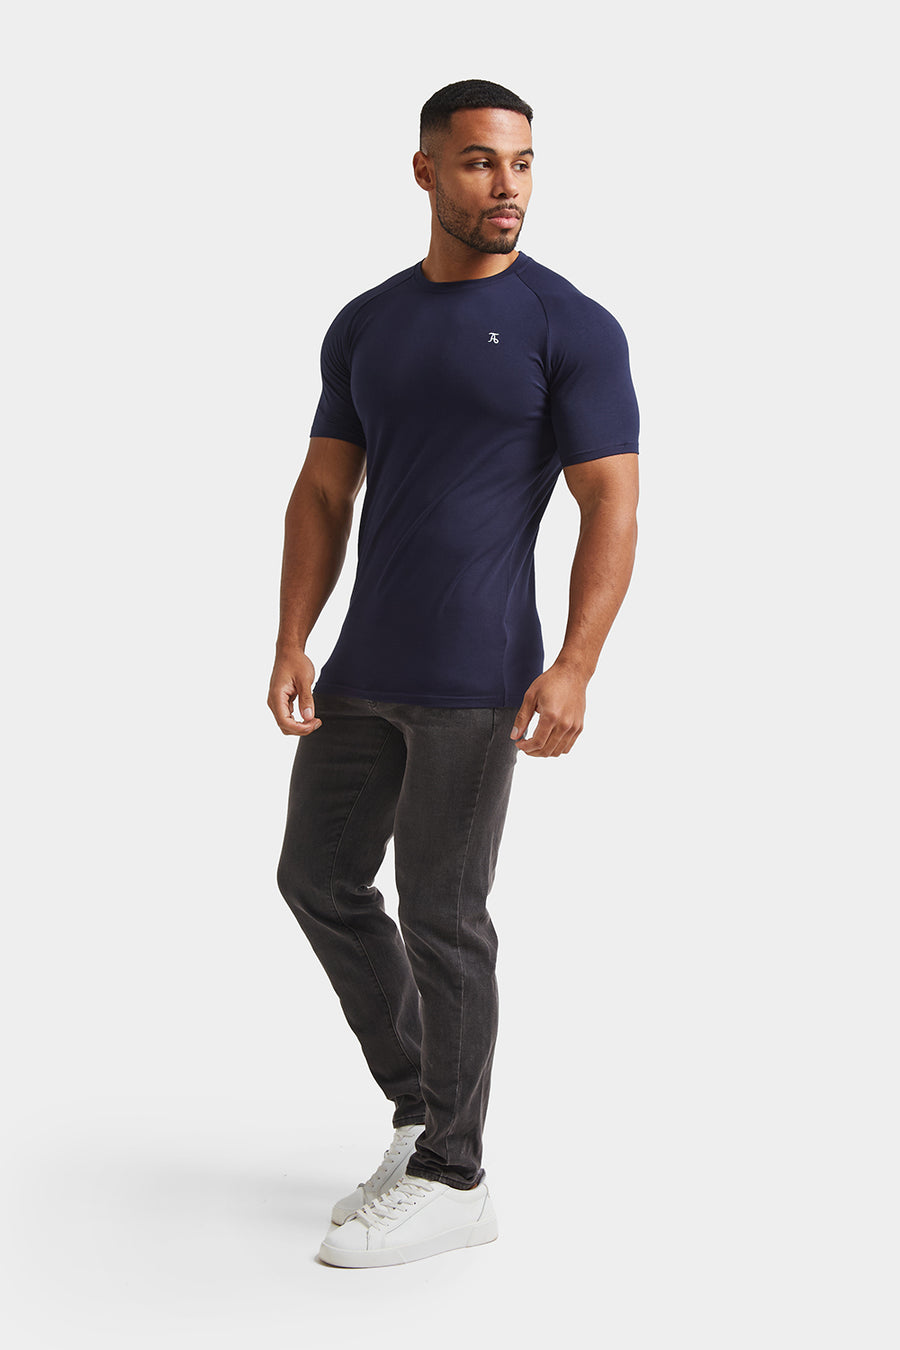 Athletic Fit T-Shirt in True Navy - TAILORED ATHLETE - USA